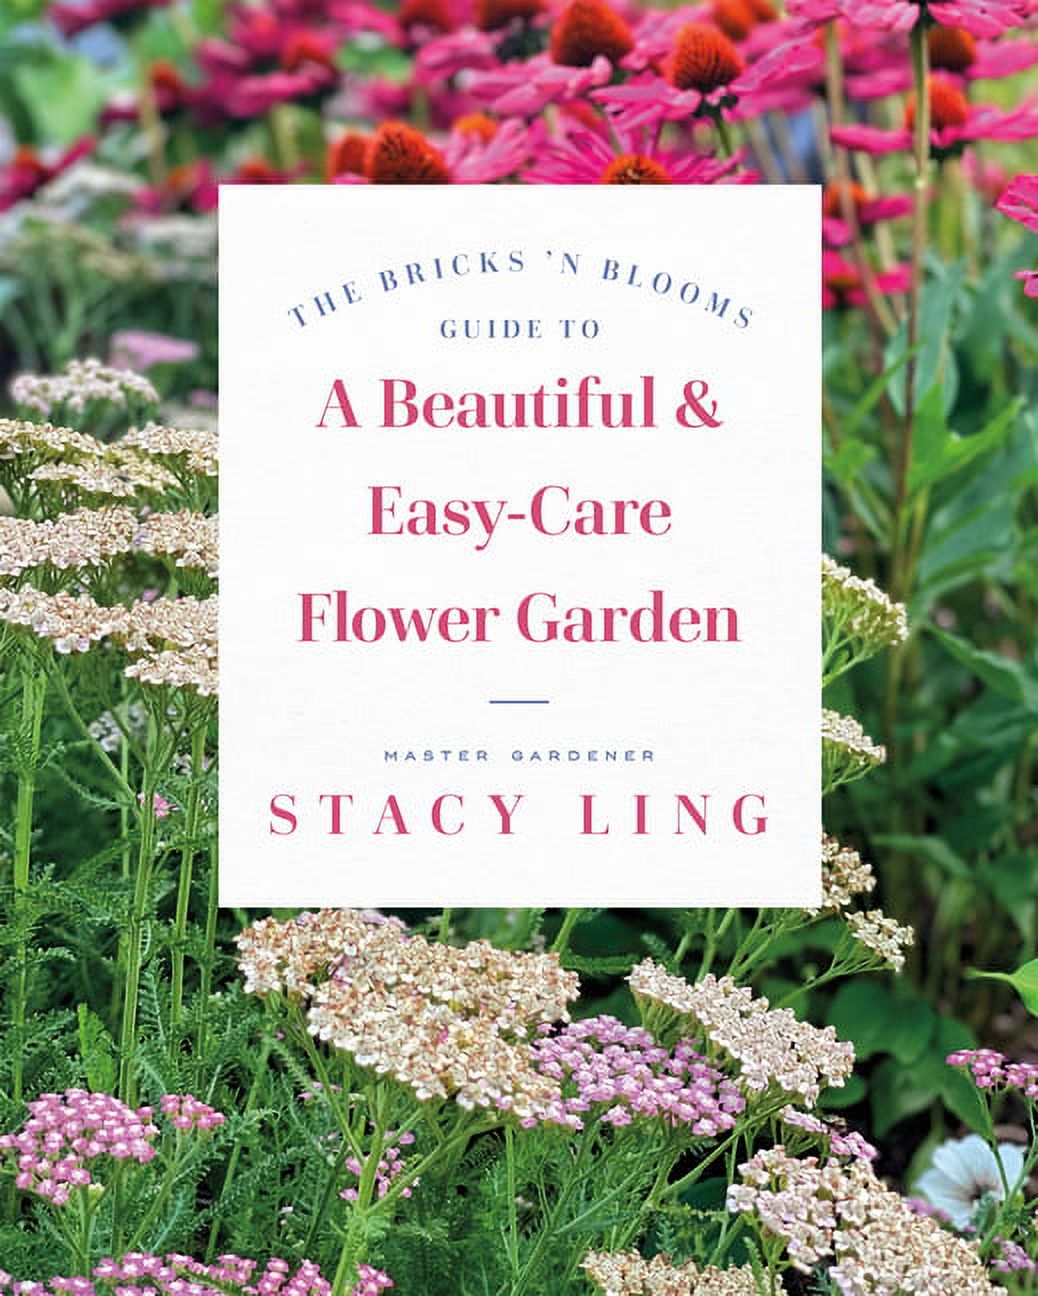 The Bricks 'n Blooms Guide to a Beautiful and Easy-Care Flower Garden (Paperback) - image 1 of 1